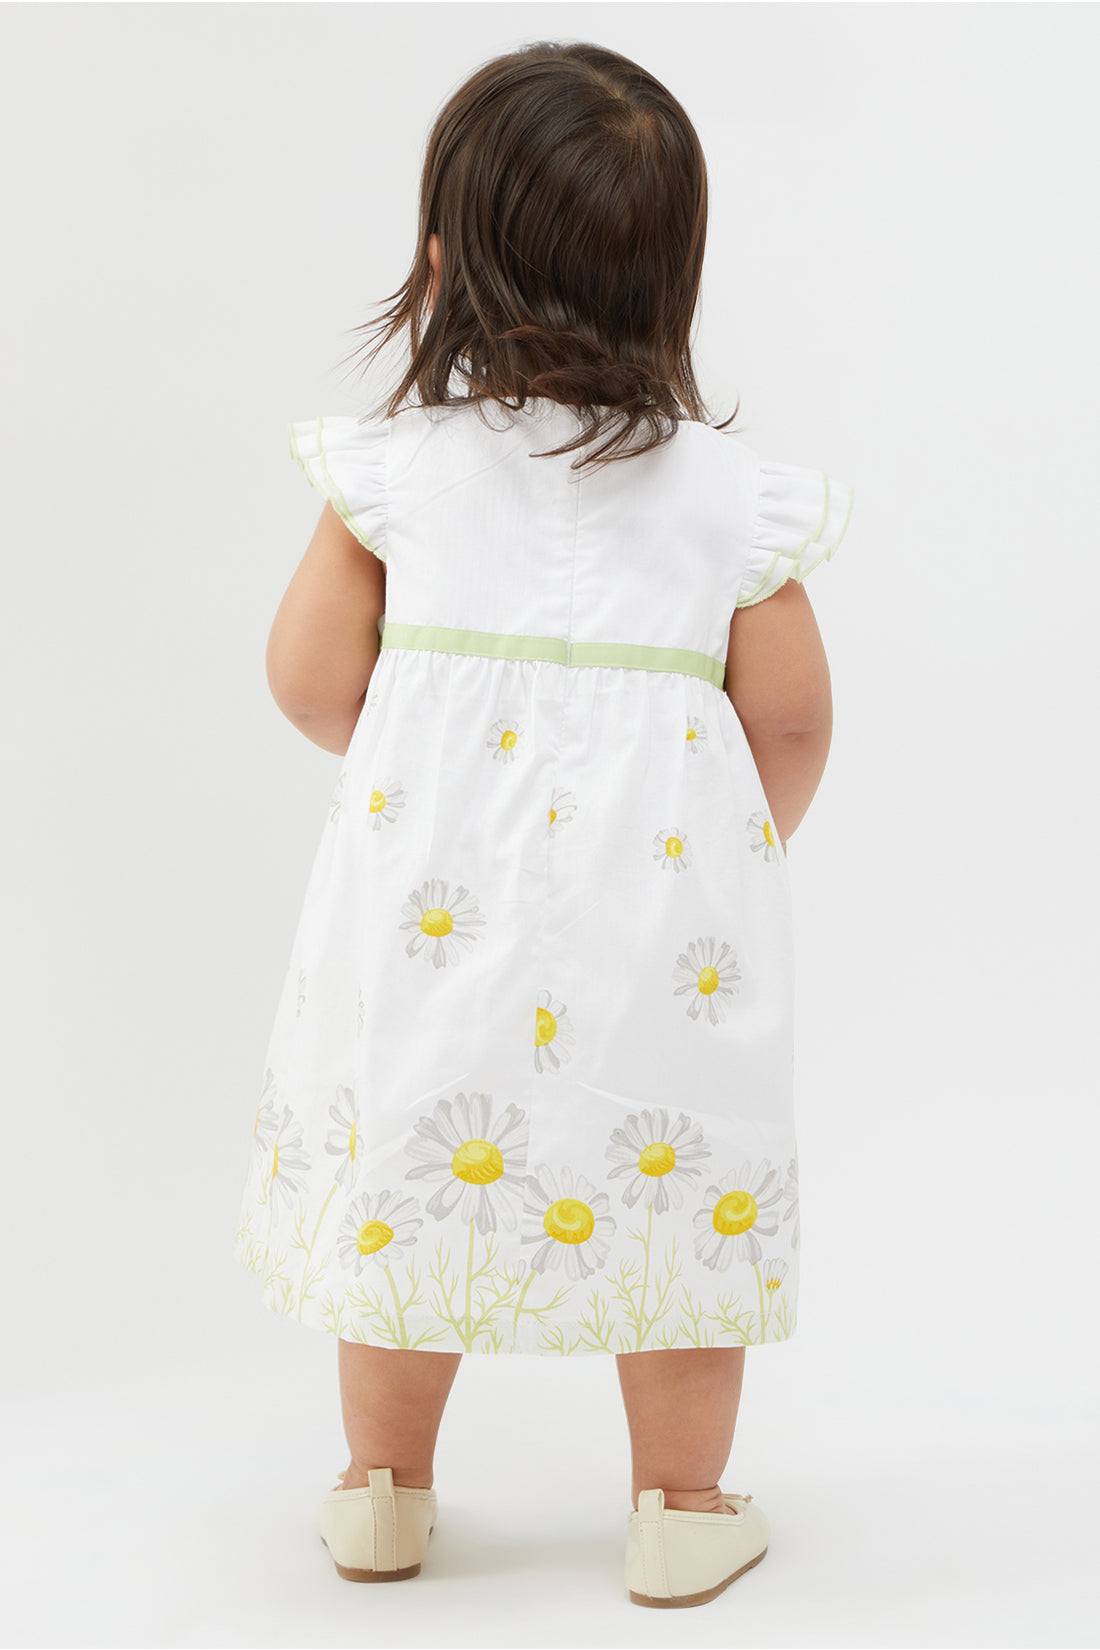 One Friday Floral Summer Dress